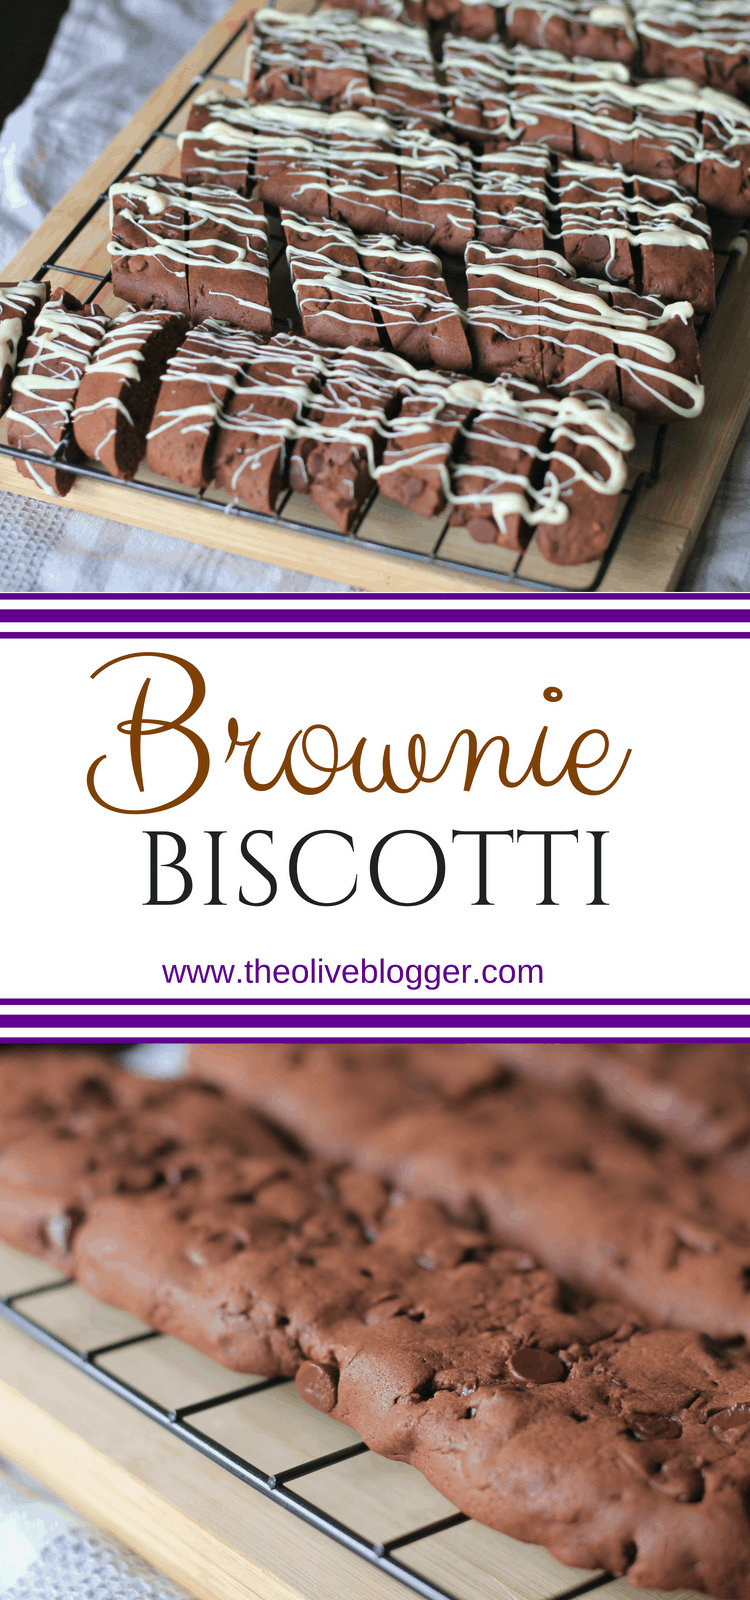 Brownie Biscotti - THE OLIVE BLOGGER - Recipes your family will love!